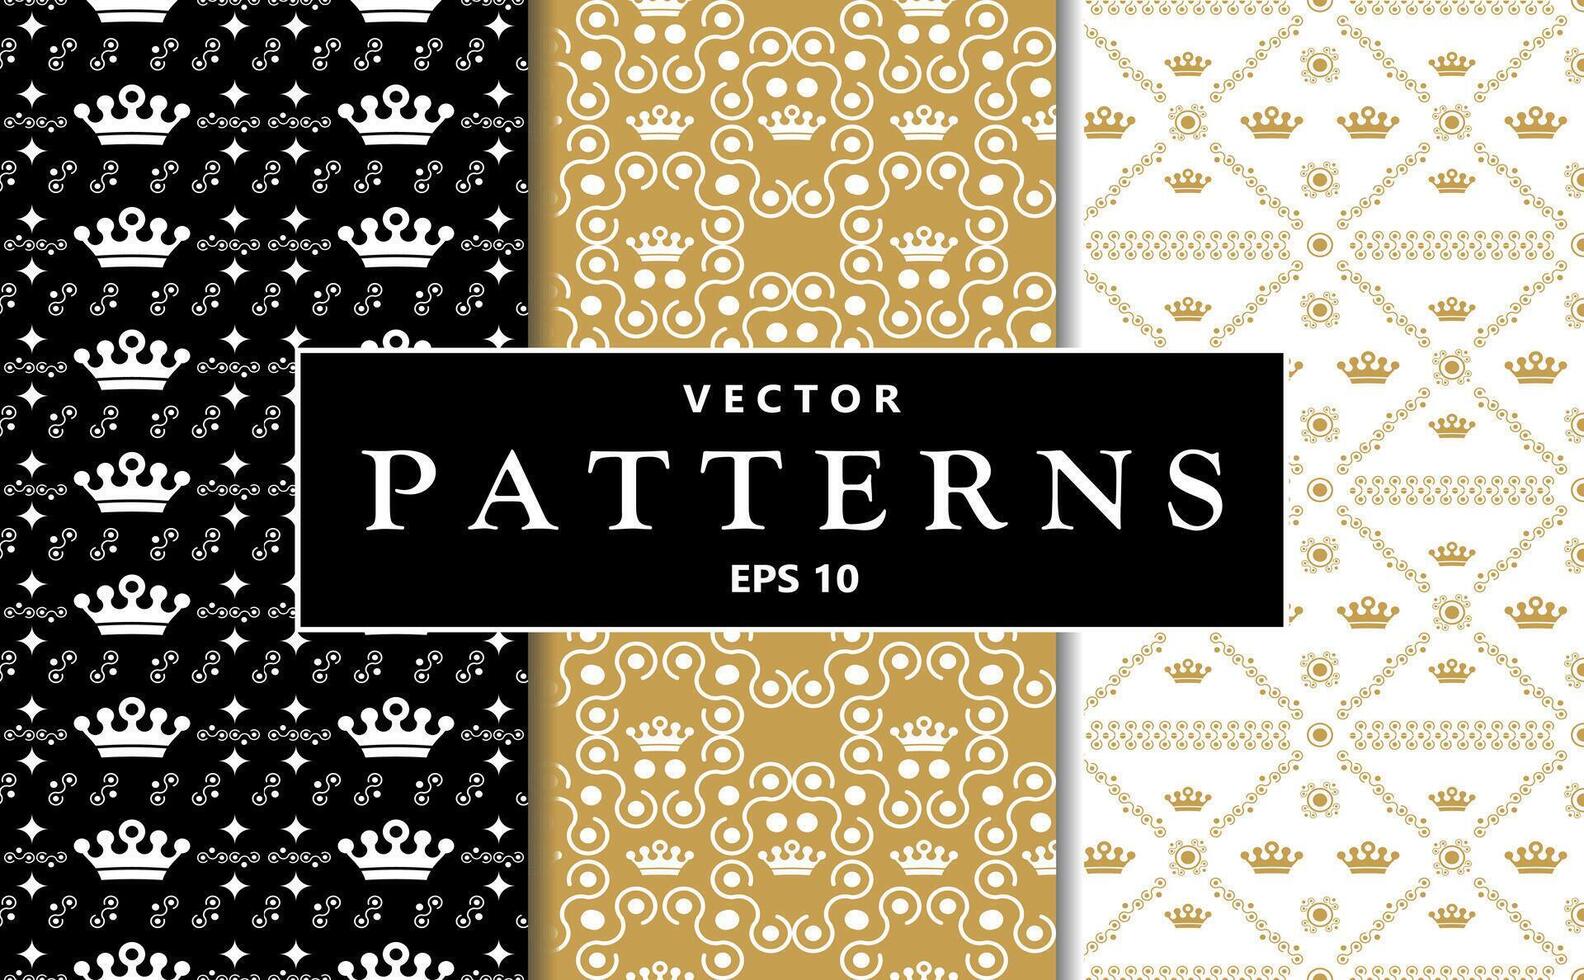 Seamless patterns with crowns and flowers background. Suitable for luxury branding, royal-themed events, children's parties, packaging design, fabric prints, stationery, wallpaper, digital backgrounds vector